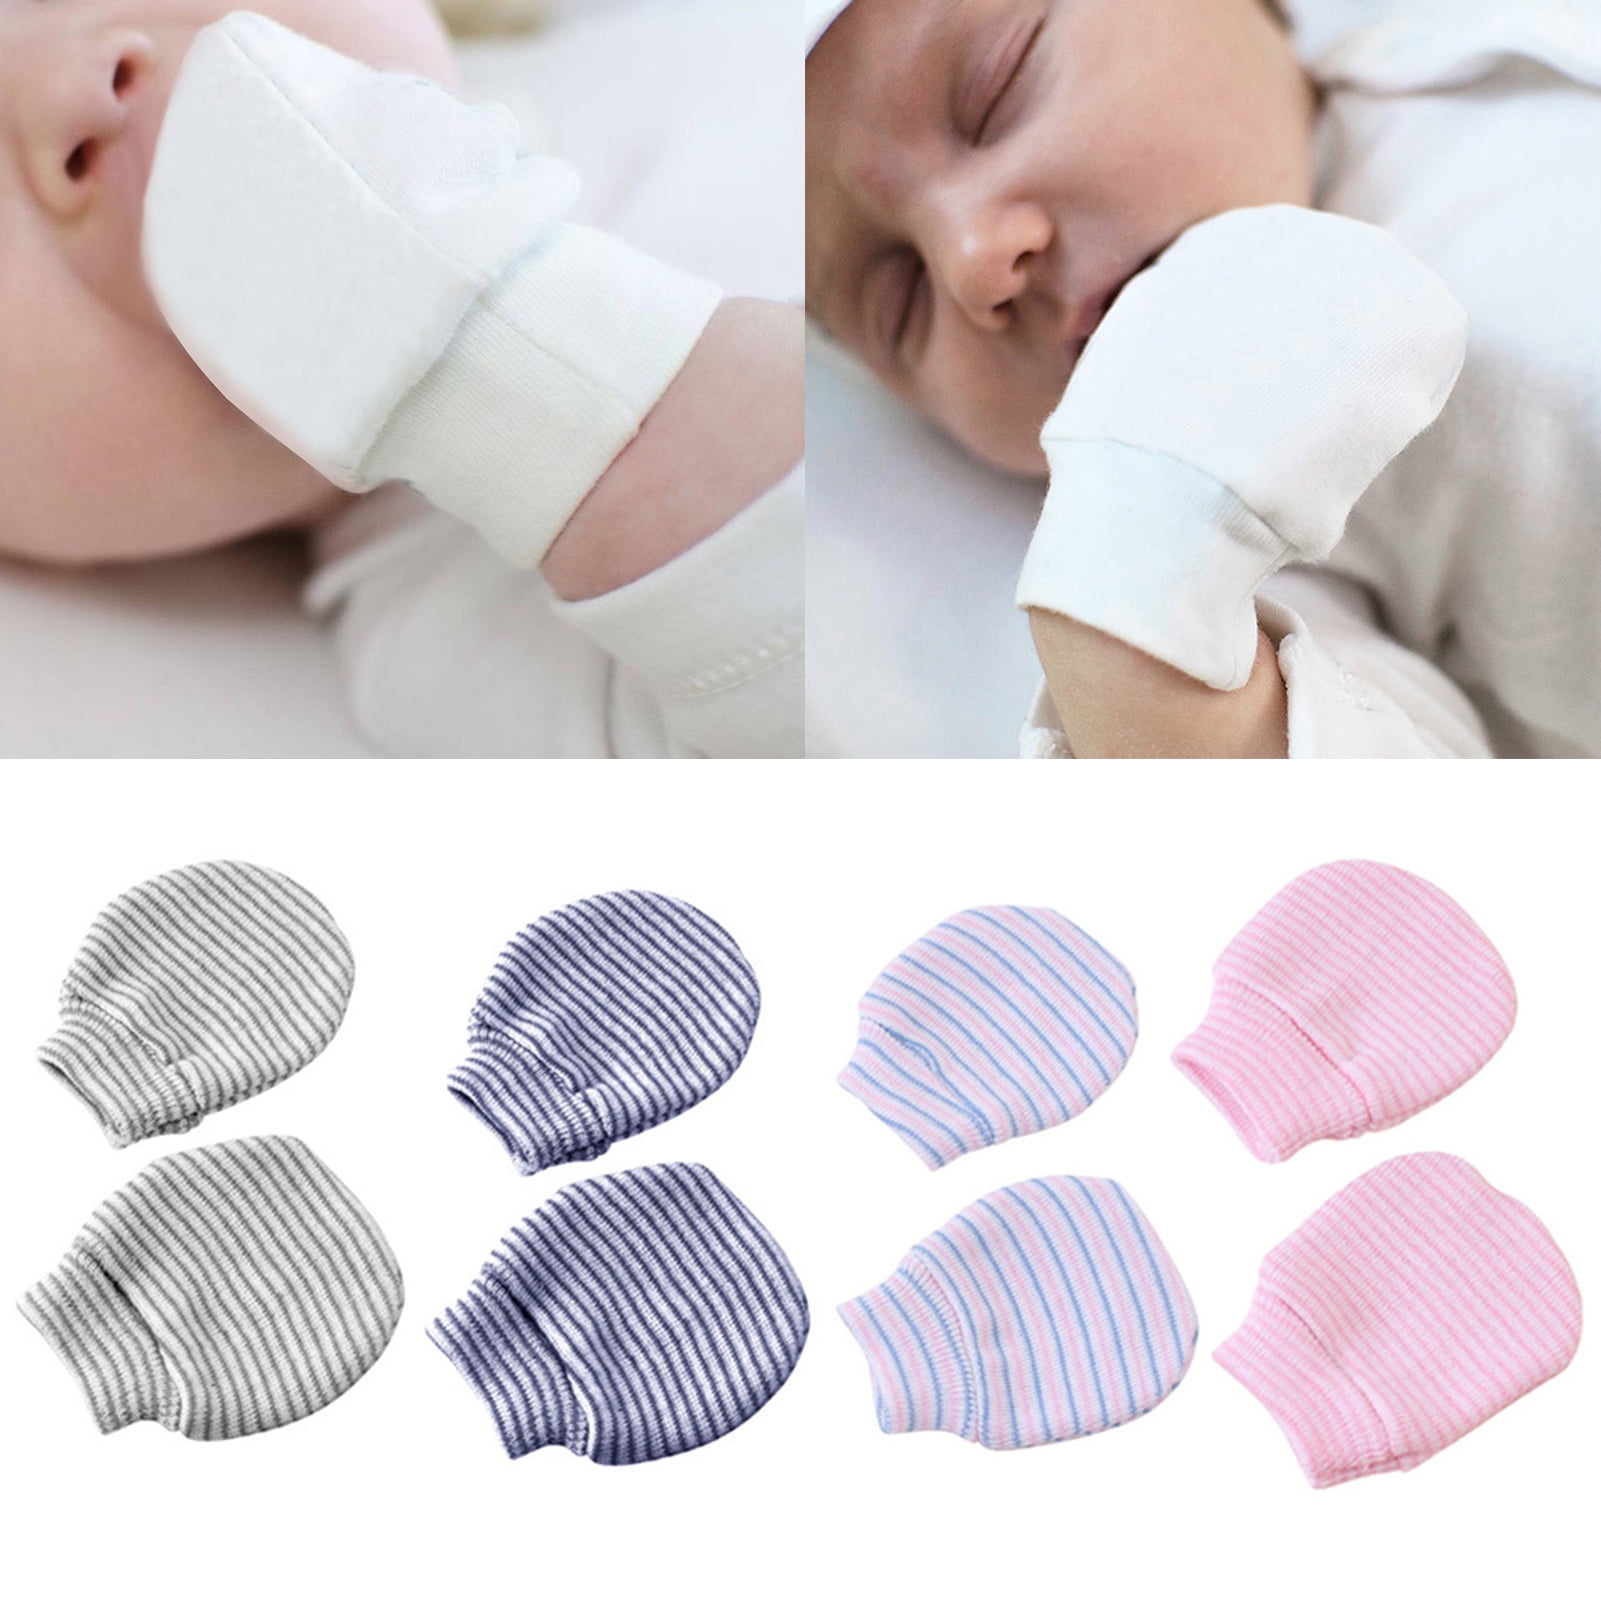 4 Pairs Cotton Newborn Baby/infant No Scratch Mittens Gloves Mix Color 